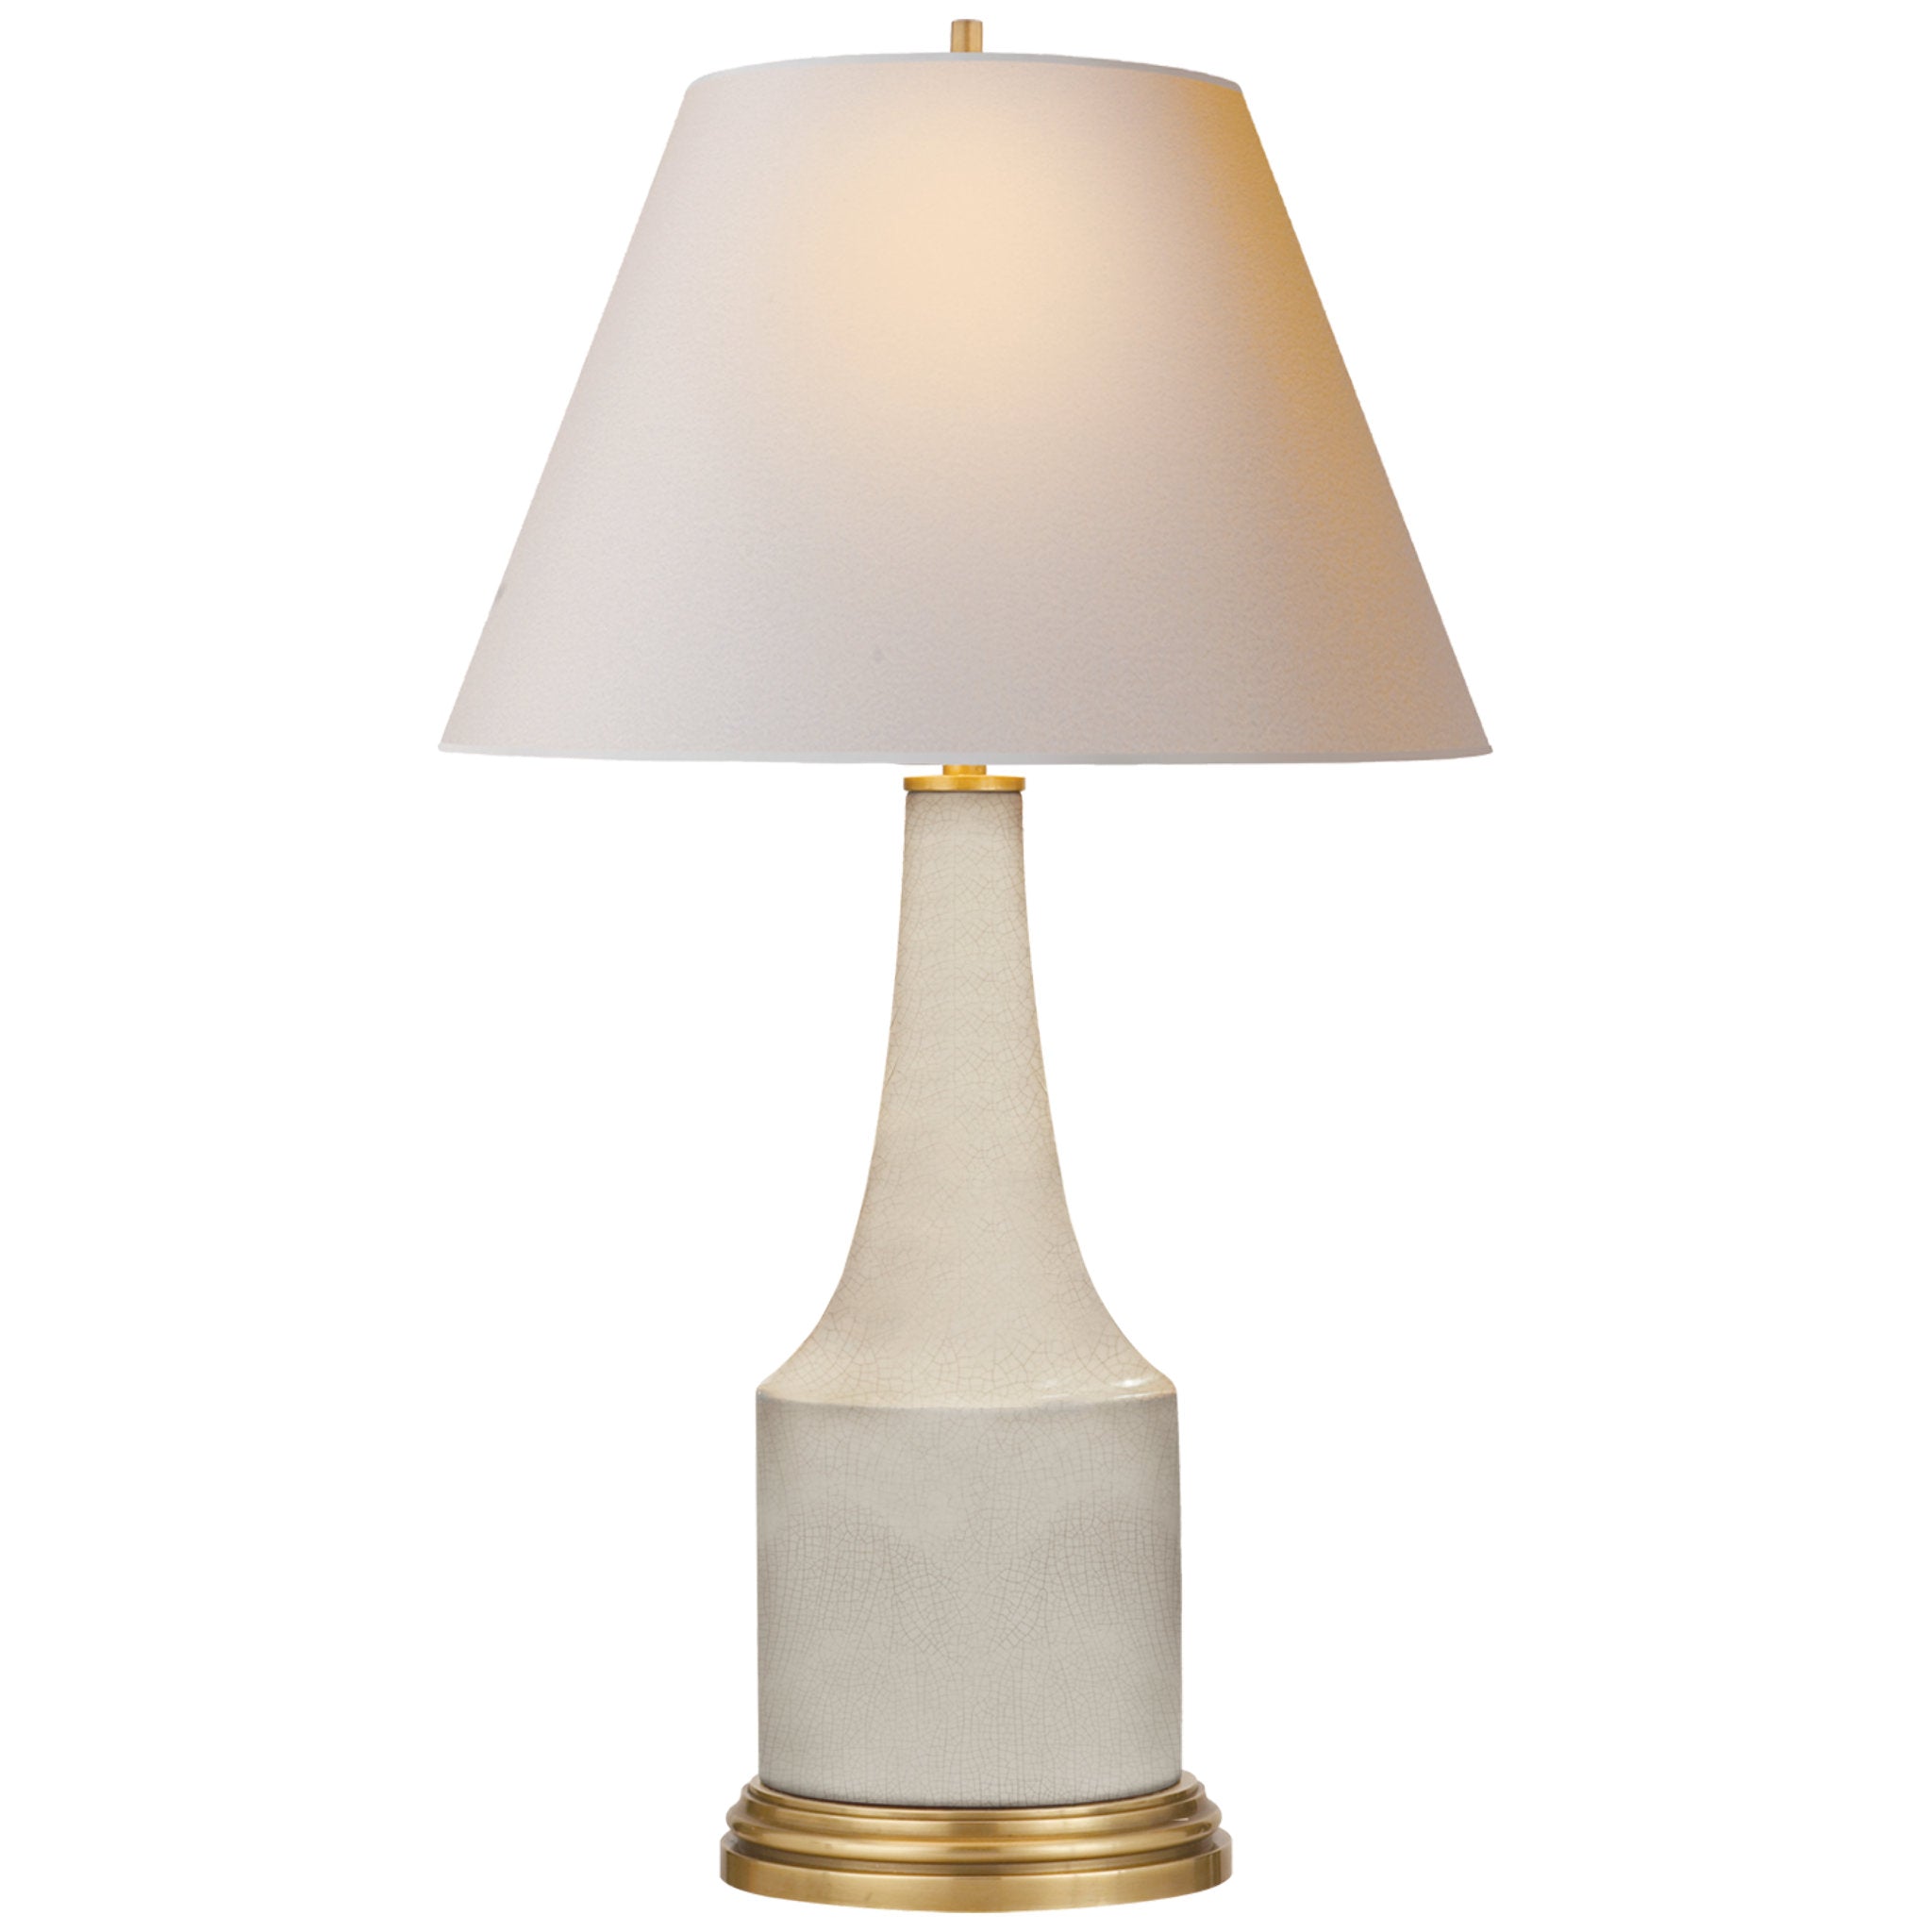 Alexa Hampton Sawyer Table Lamp in Tea Stain Porcelain with Natural Paper Shade